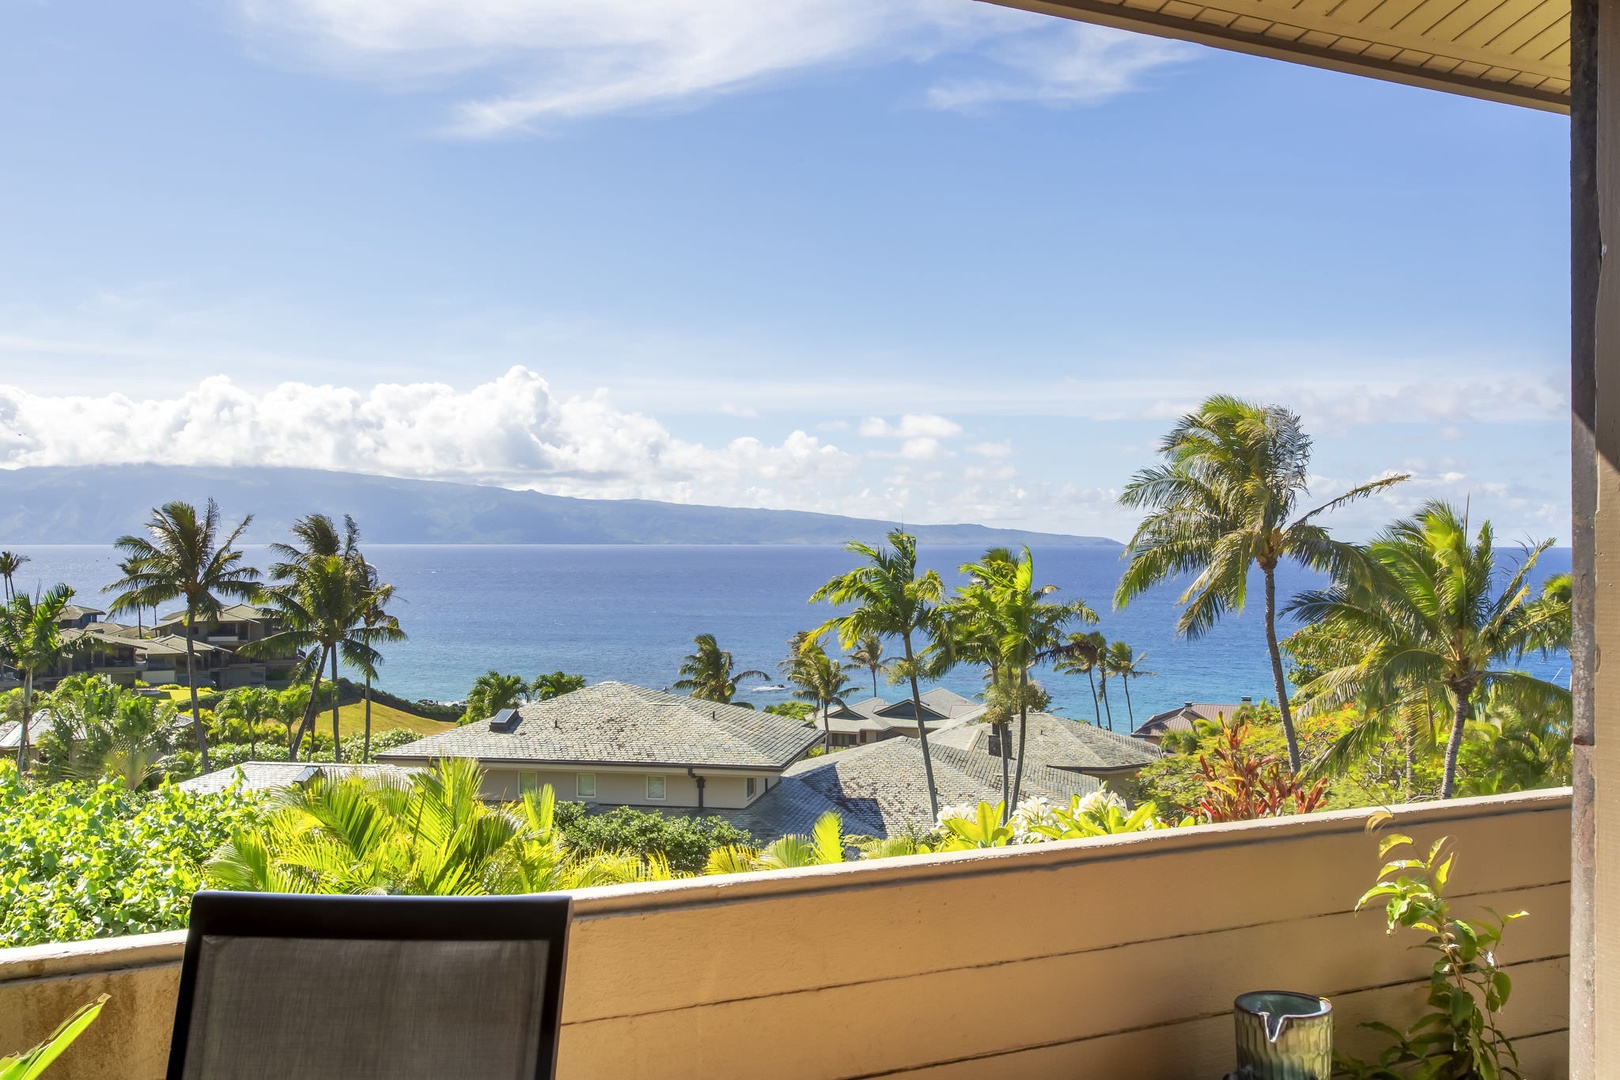 Amazing panoramic ocean views from the balcony